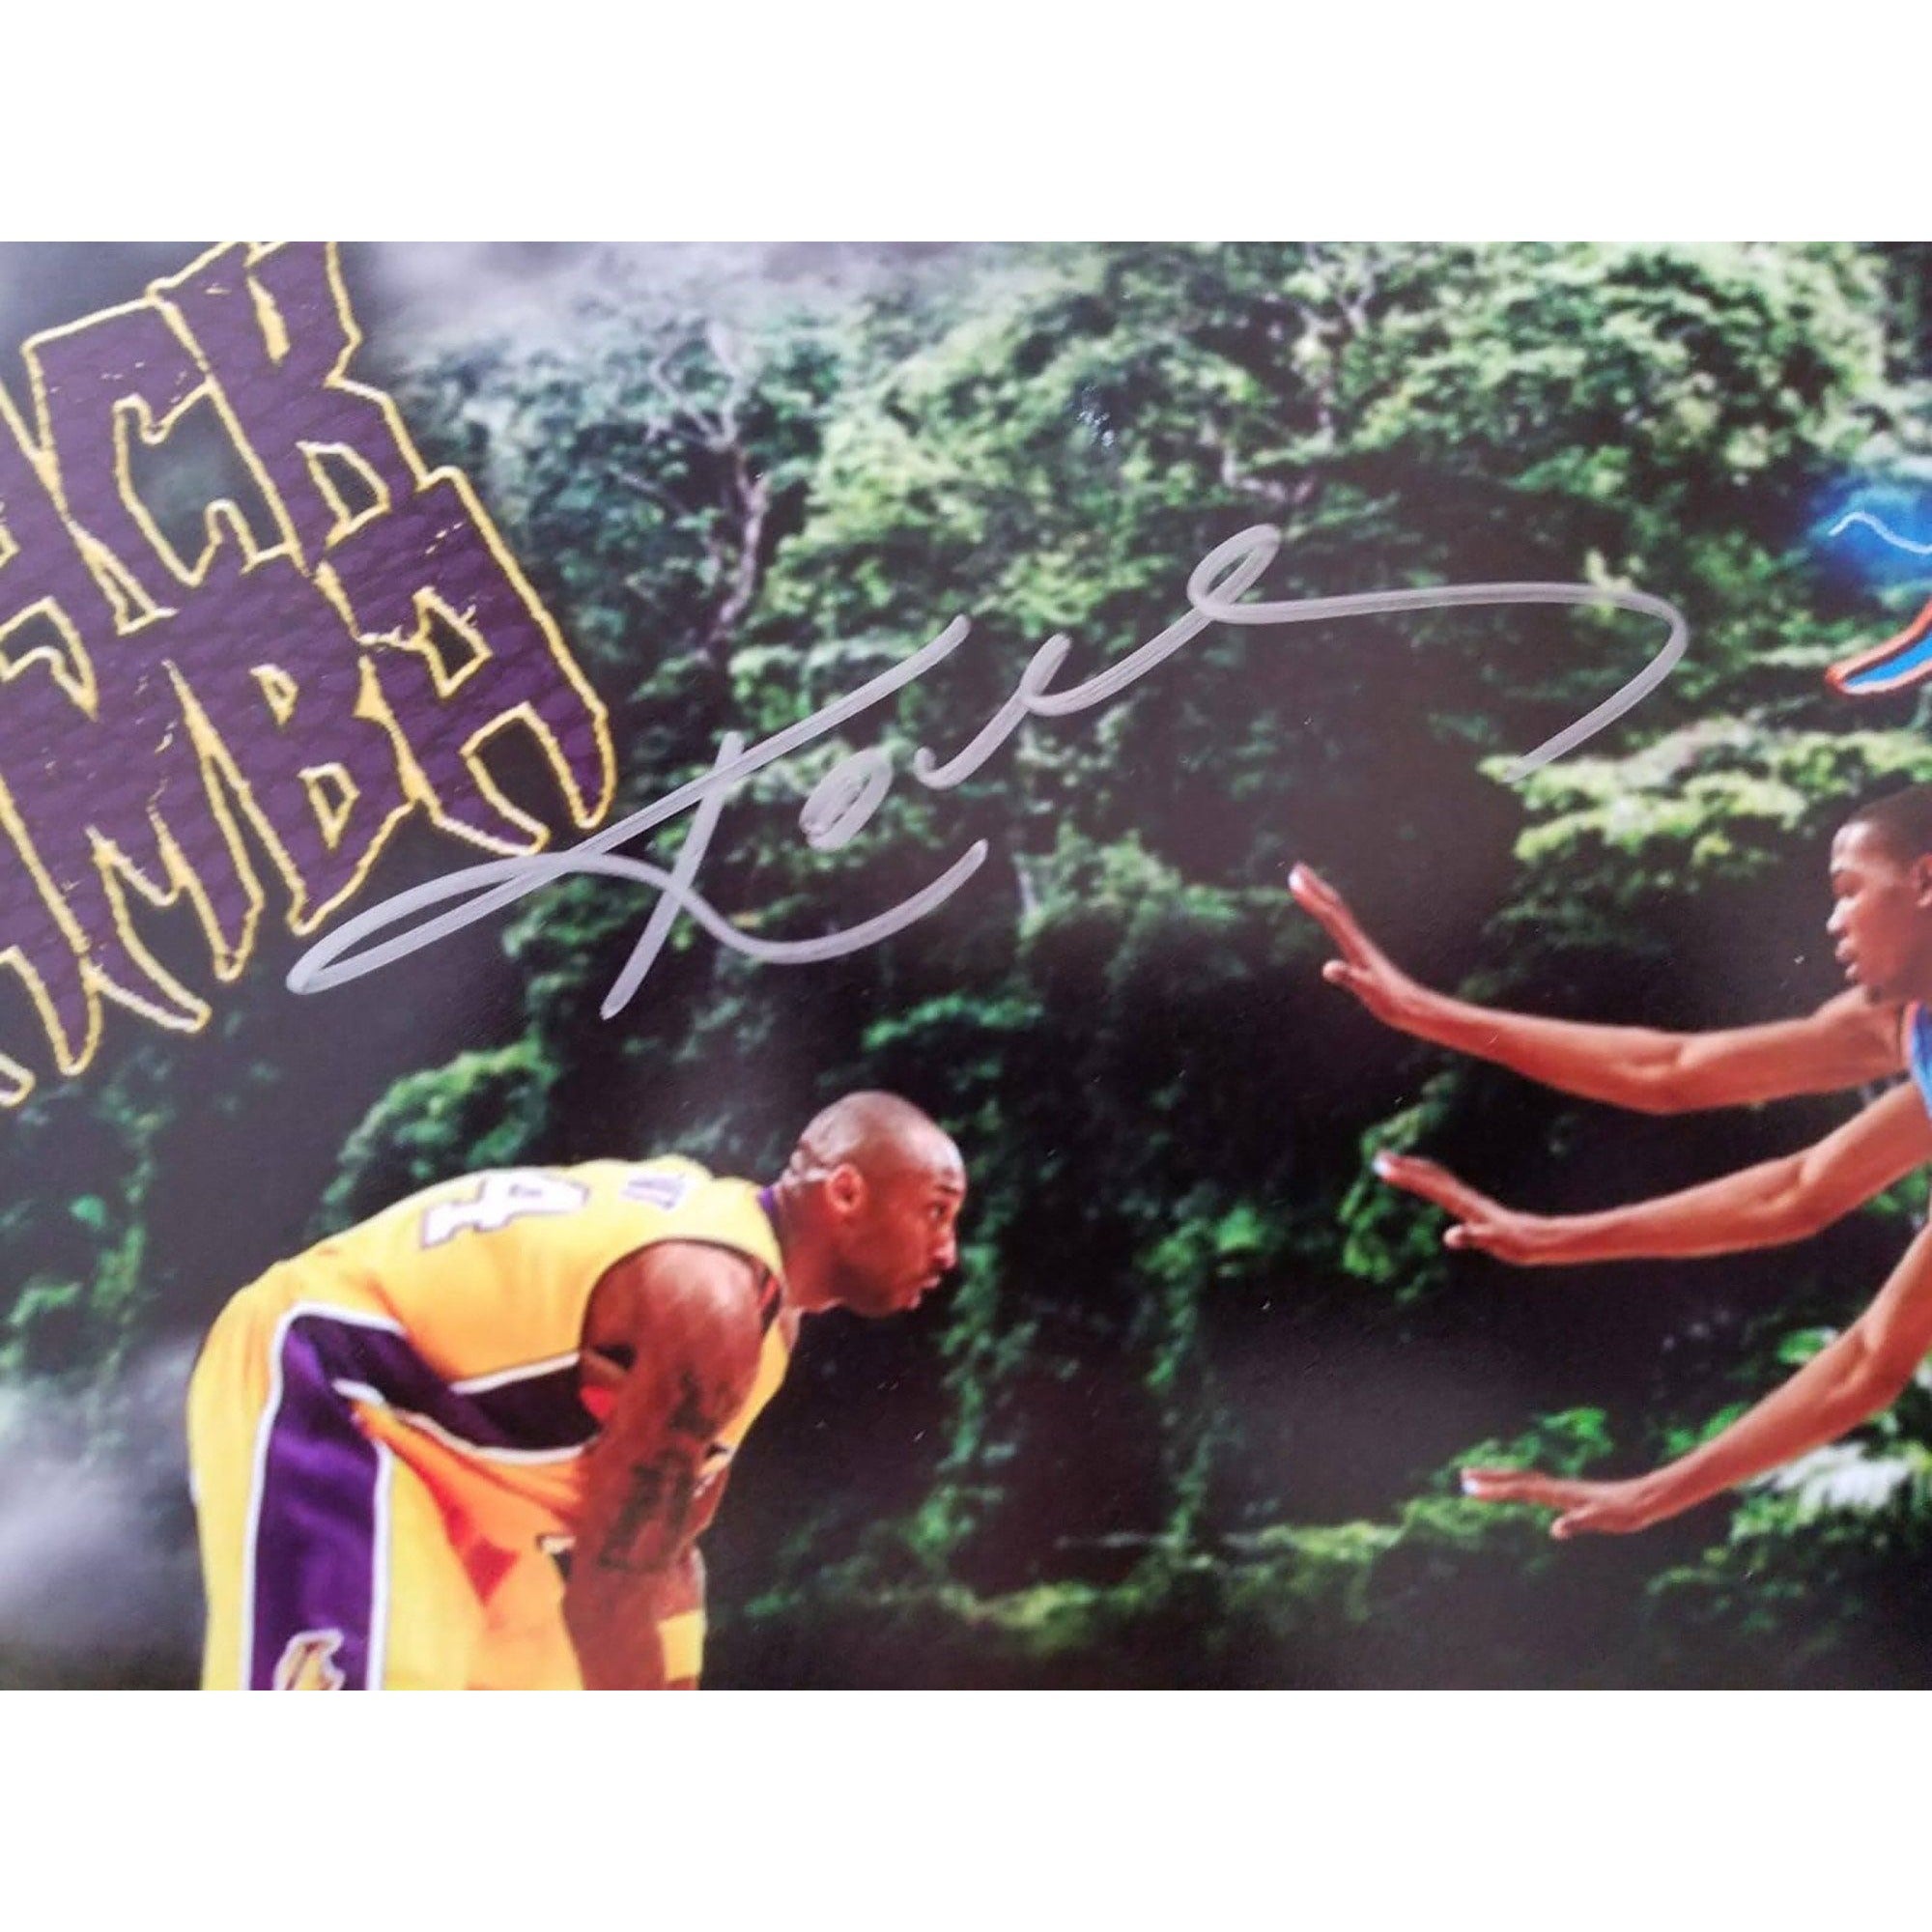 Kobe Bryant, Kevin Durant 11 by 14 signed photo with proof